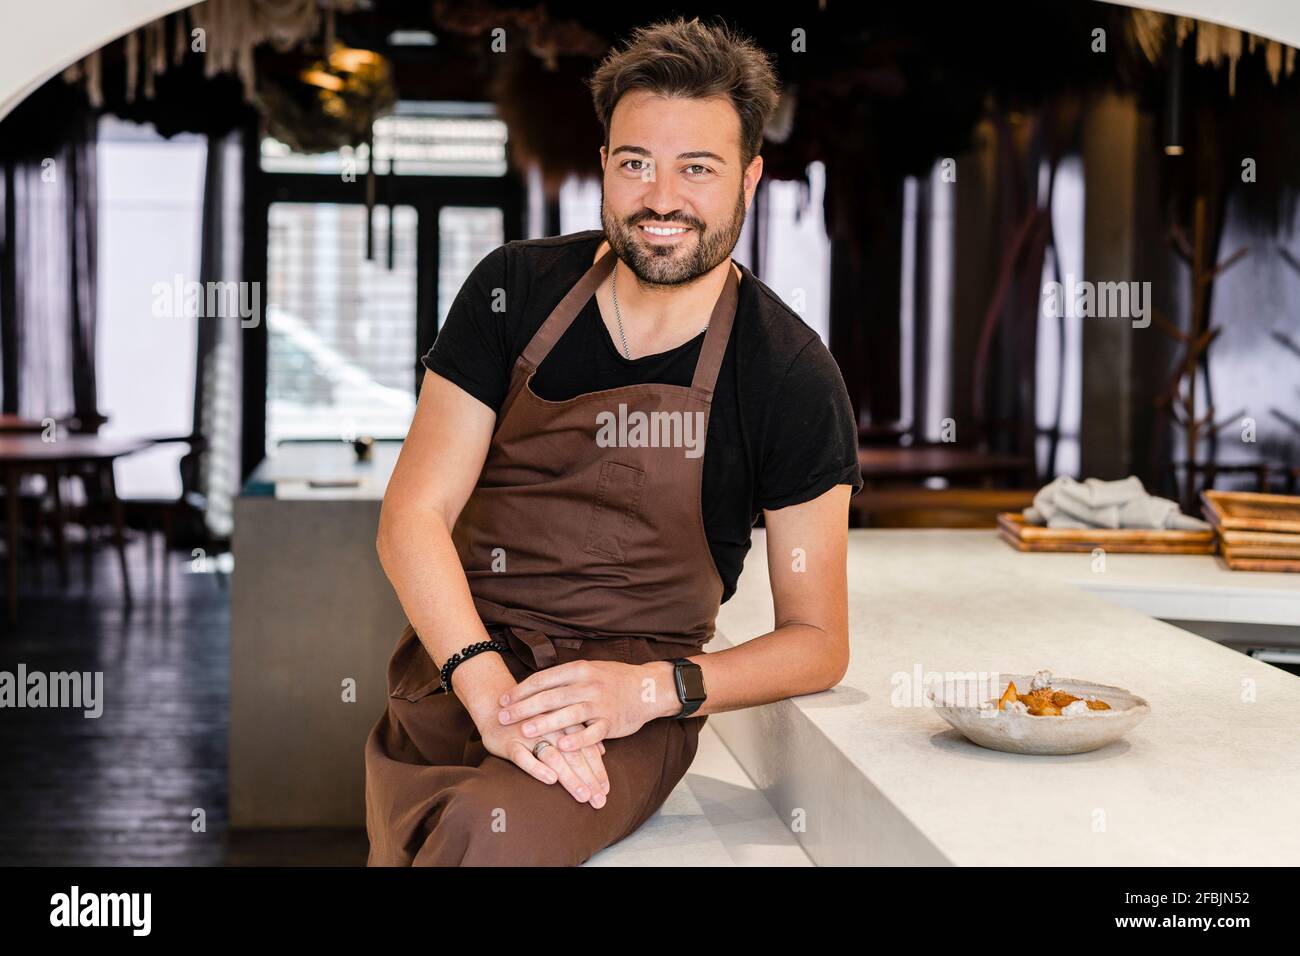 Smiling chef leaning while sitting by restaurant counter Stock Photo